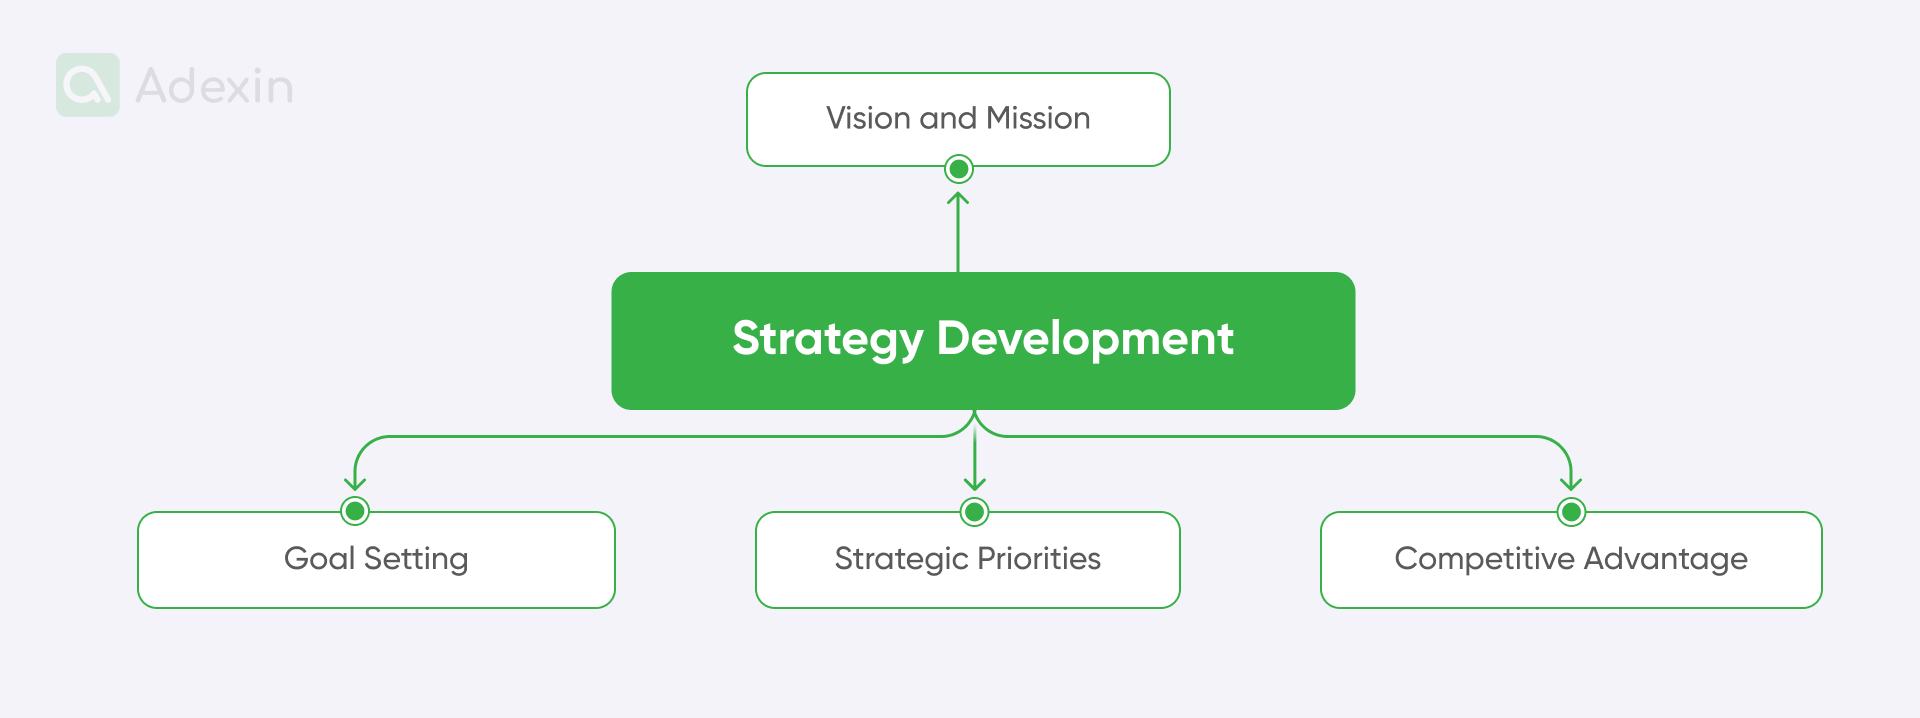 Elements of the strategy development